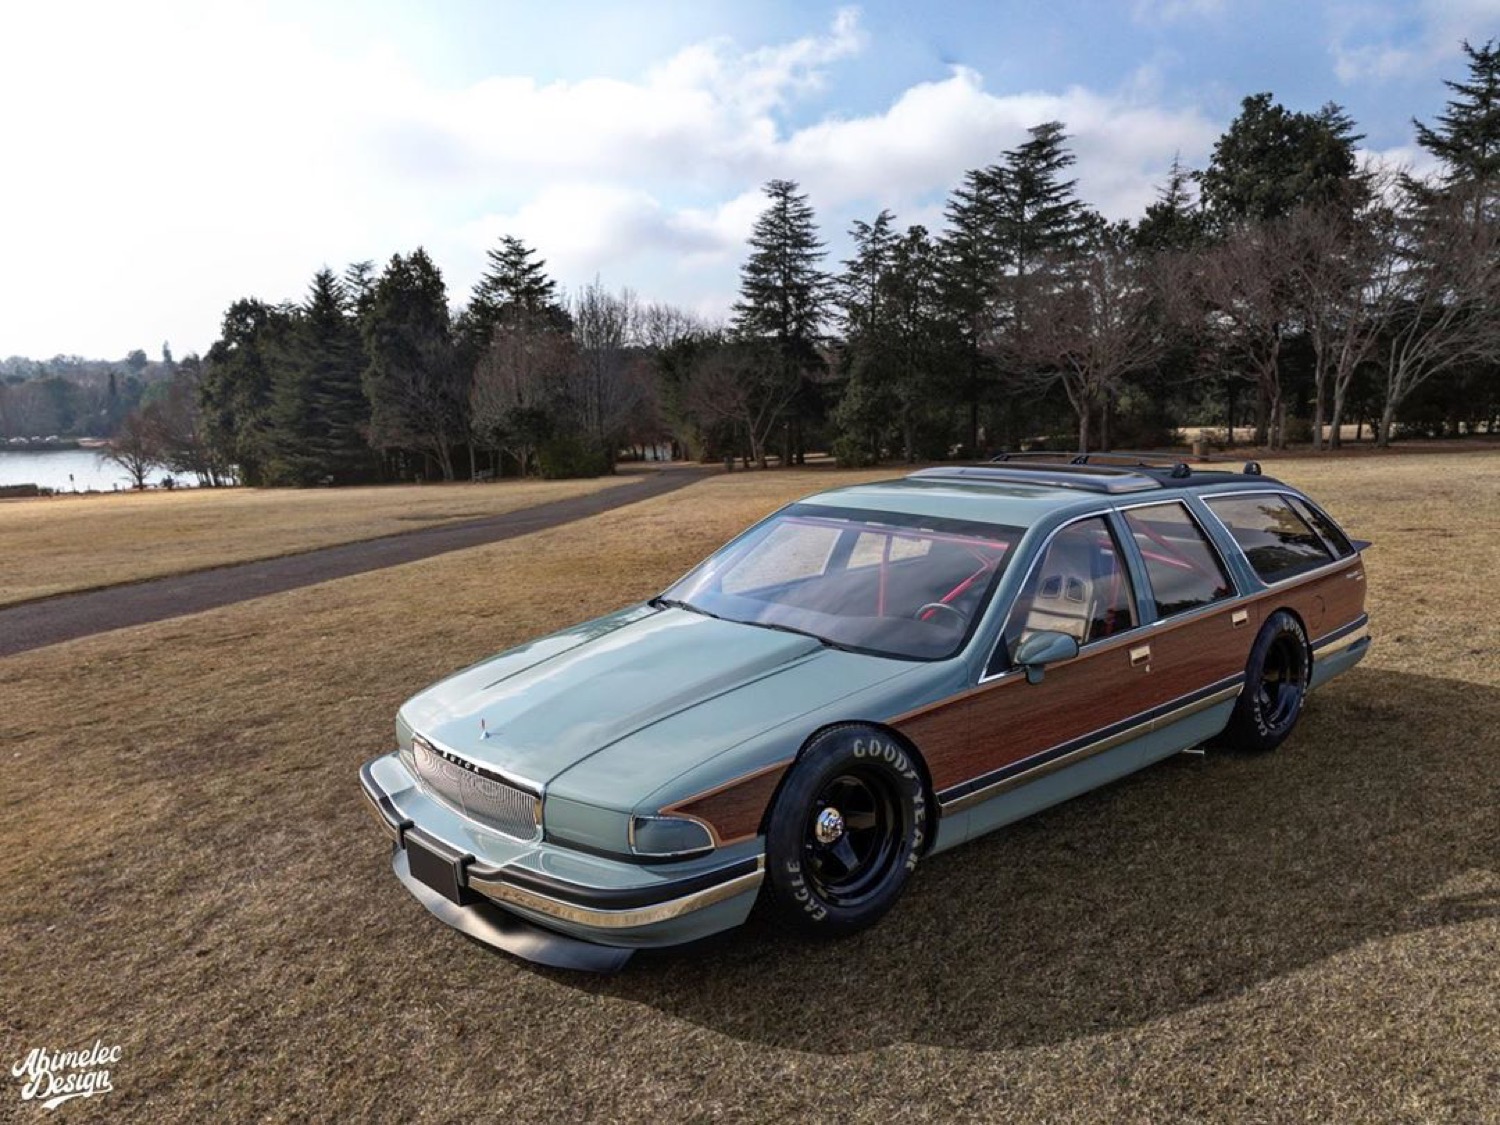 Buick Roadmaster Wagon Makes For A Wicked Race Car Rendering | GM Authority